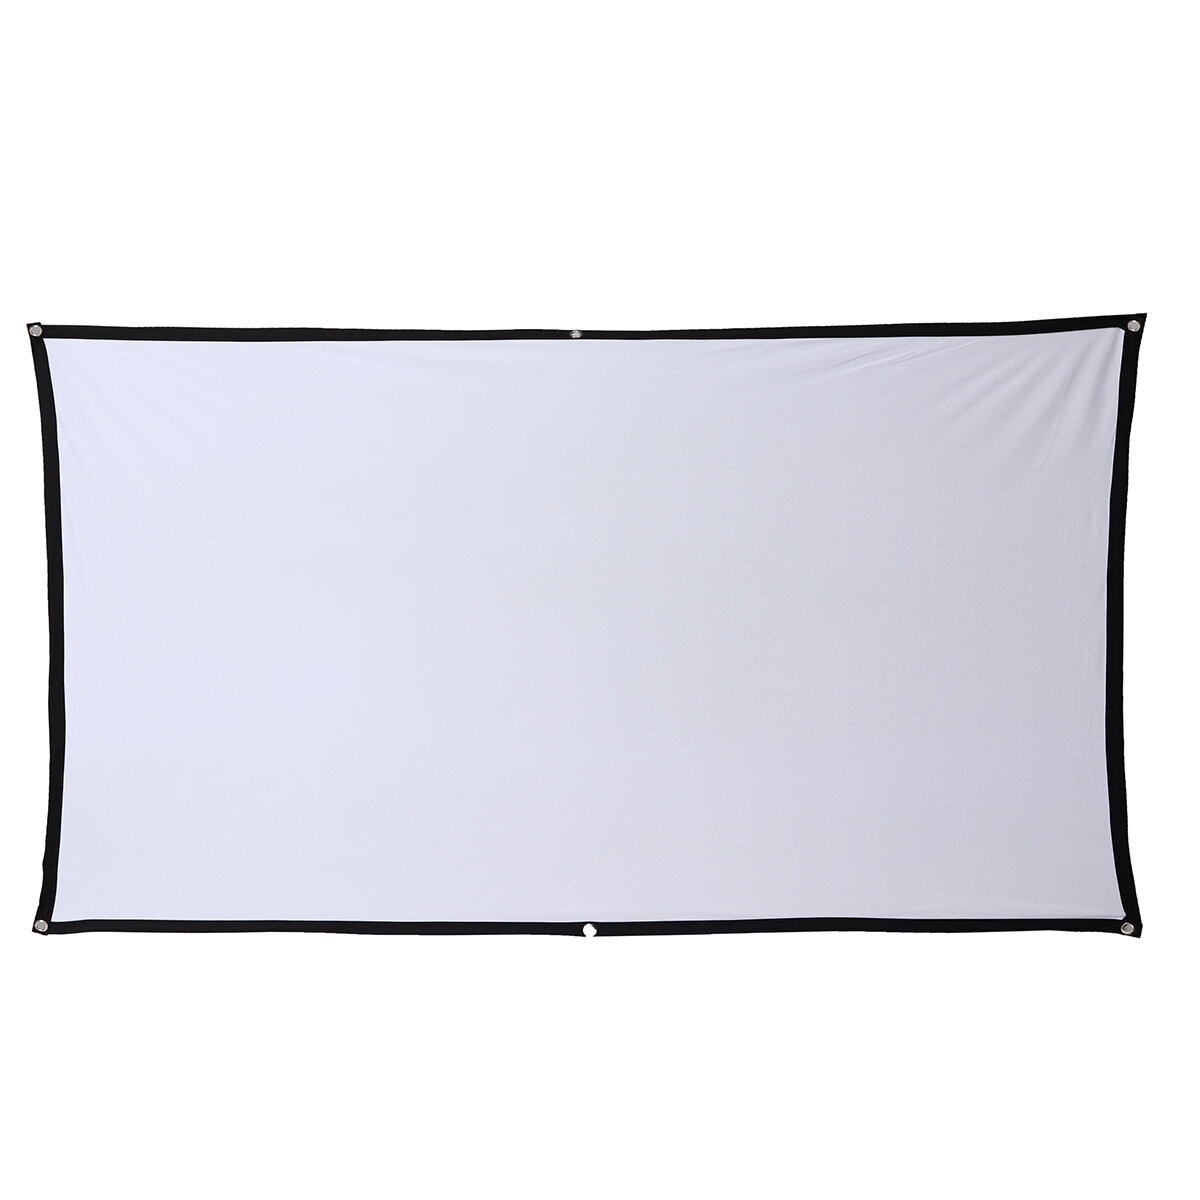 16: 9 Projector Screen Home Projection Screen Cloth Outdoor Portable Folding Simple Soft Curtain wit